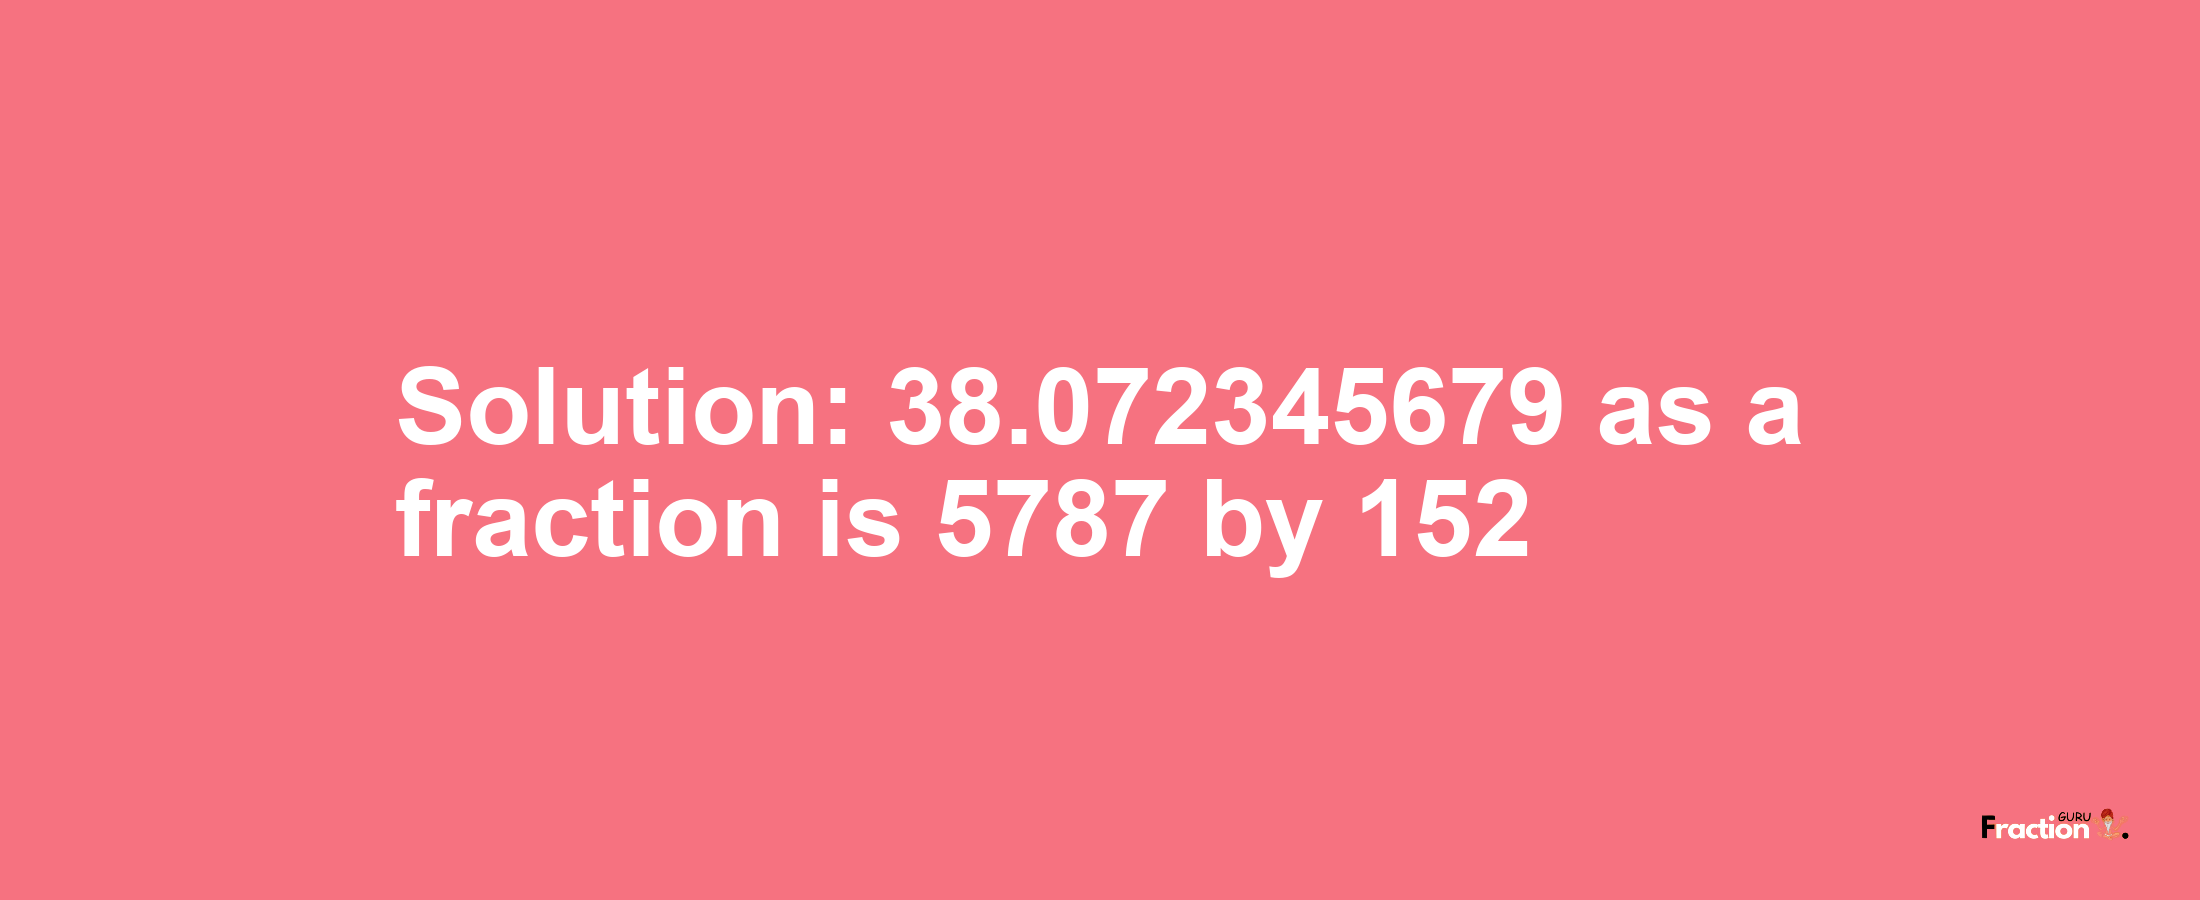 Solution:38.072345679 as a fraction is 5787/152